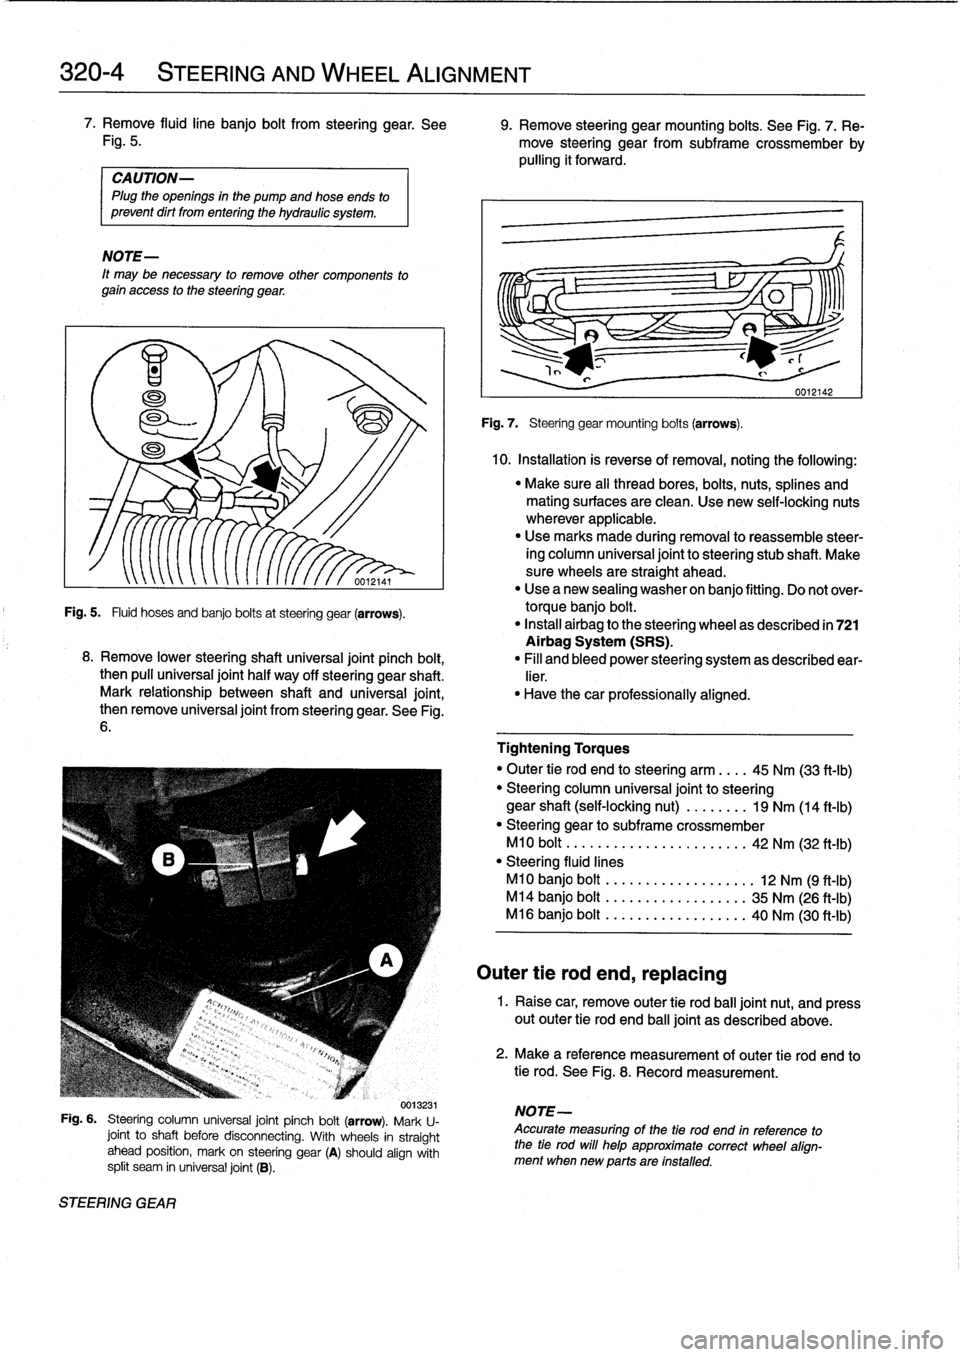 BMW 318i 1997 E36 User Guide 
320-
4

	

STEERING
AND
WHEEL
ALIGNMENT

7
.
Remove
fluidline
banjo
bolt
from
steering
gear
.
See

	

9
.
Remove
steering
gearmounting
bolts
.
See
Fig
.
7
.
Re
Fig
.
5
.

	

move
steering
gear
from
s